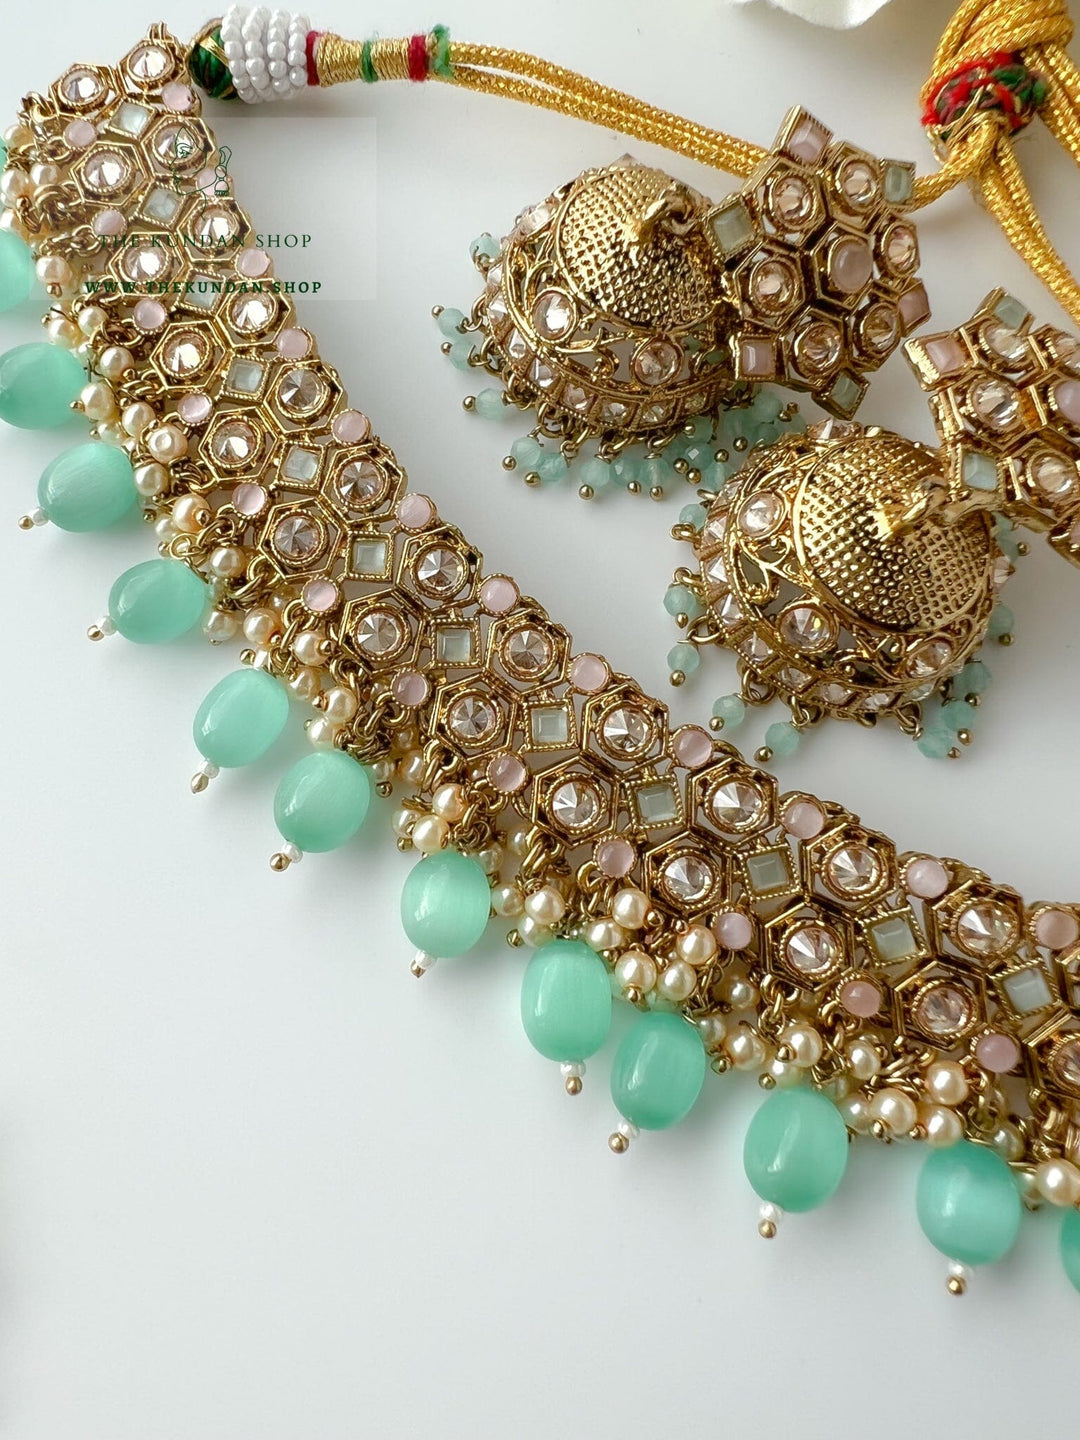 Keeper in Pink & Mint Necklace Sets THE KUNDAN SHOP 